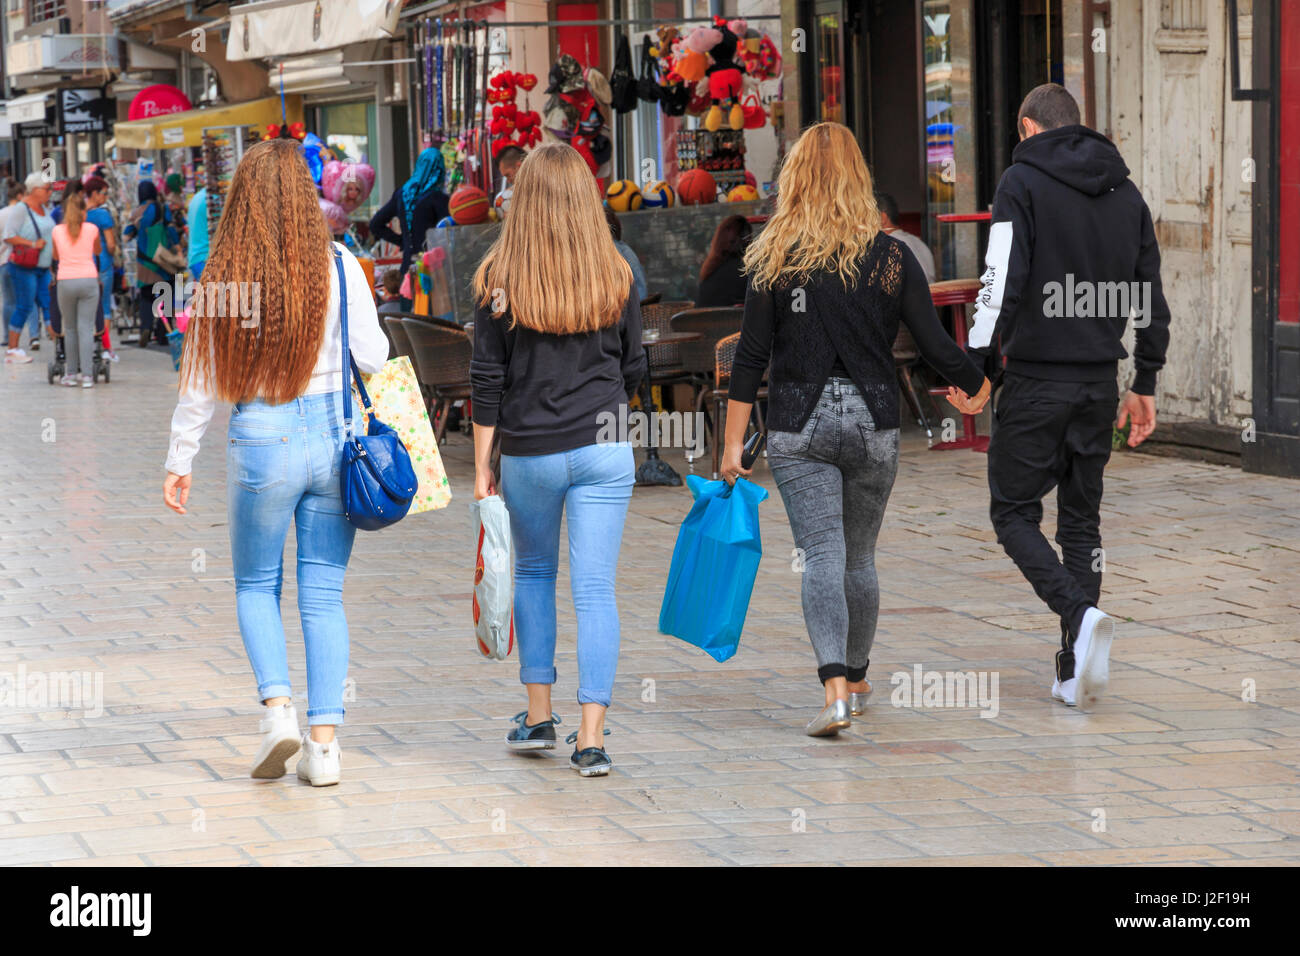 Macedonia, Lake Ohrid, Struga situated in the Southwest region. The town of Struga is the seat of Struga Municipality. Shoppers along pedestrian street. (Editorial Use Only) Stock Photo